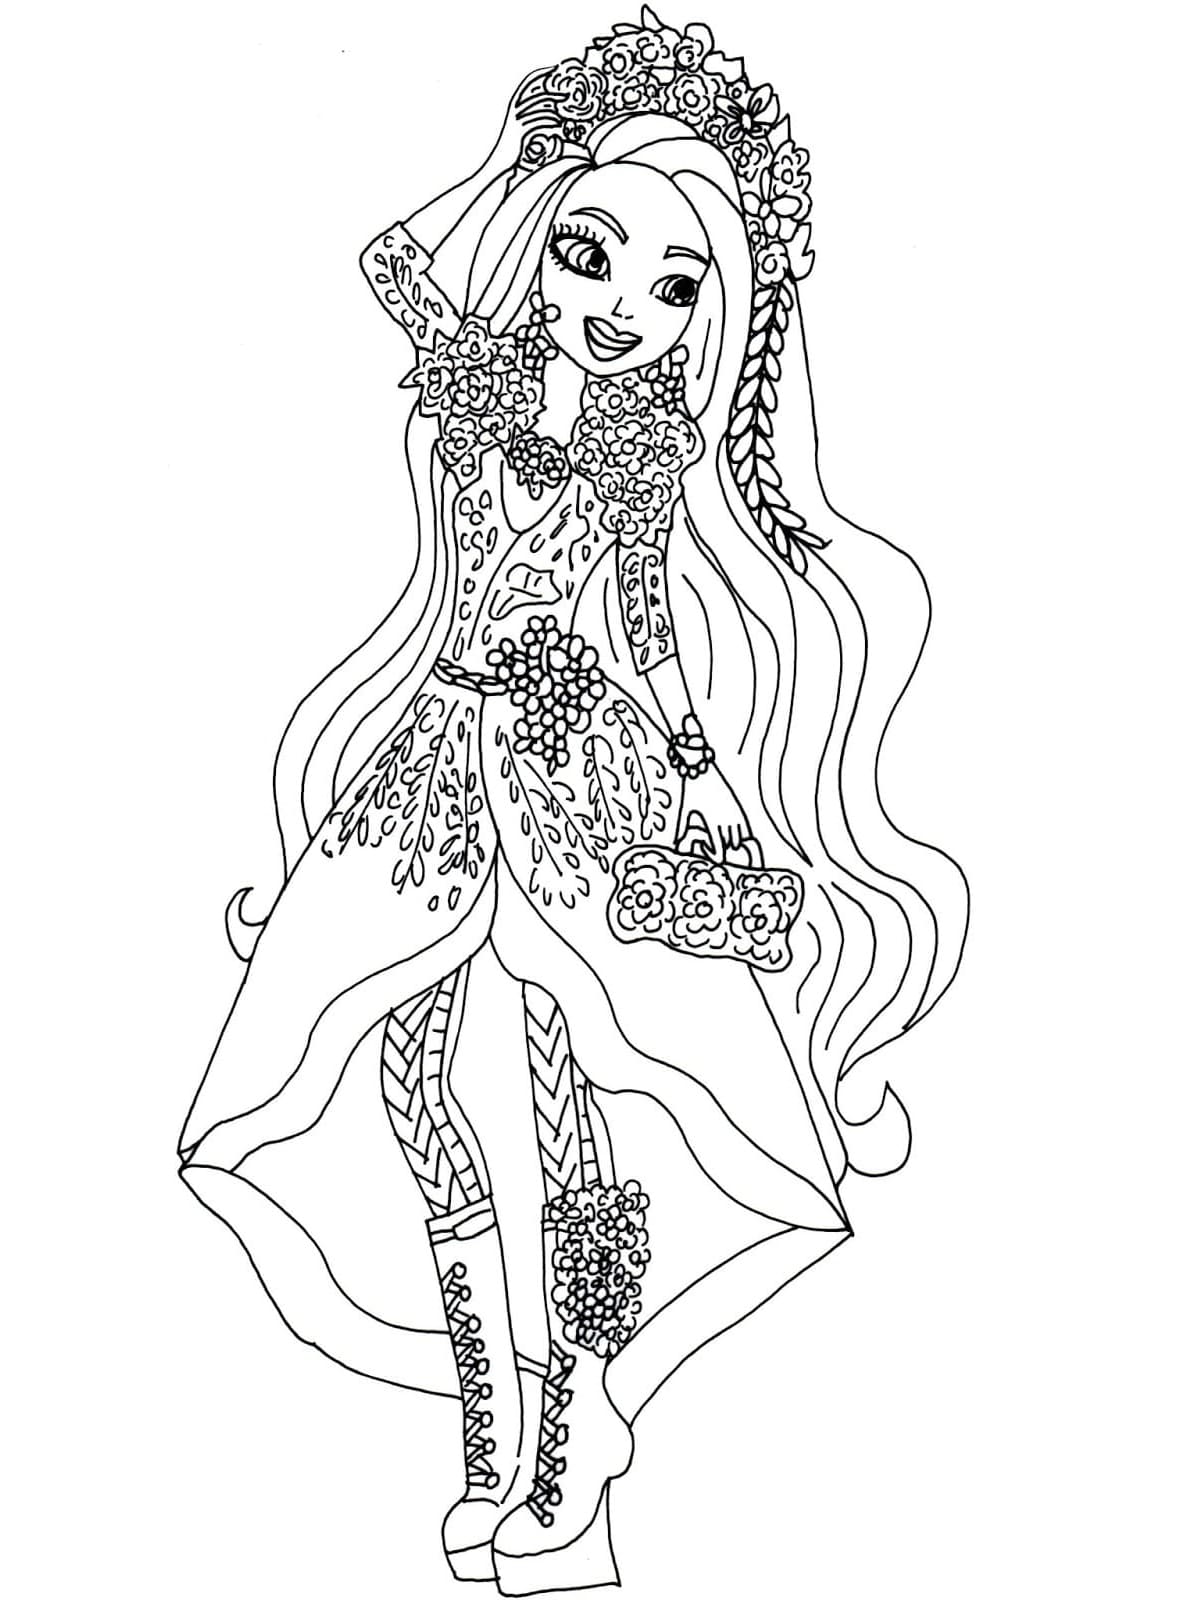 Holly O’Hair Ever After High coloring page - Download, Print or Color ...